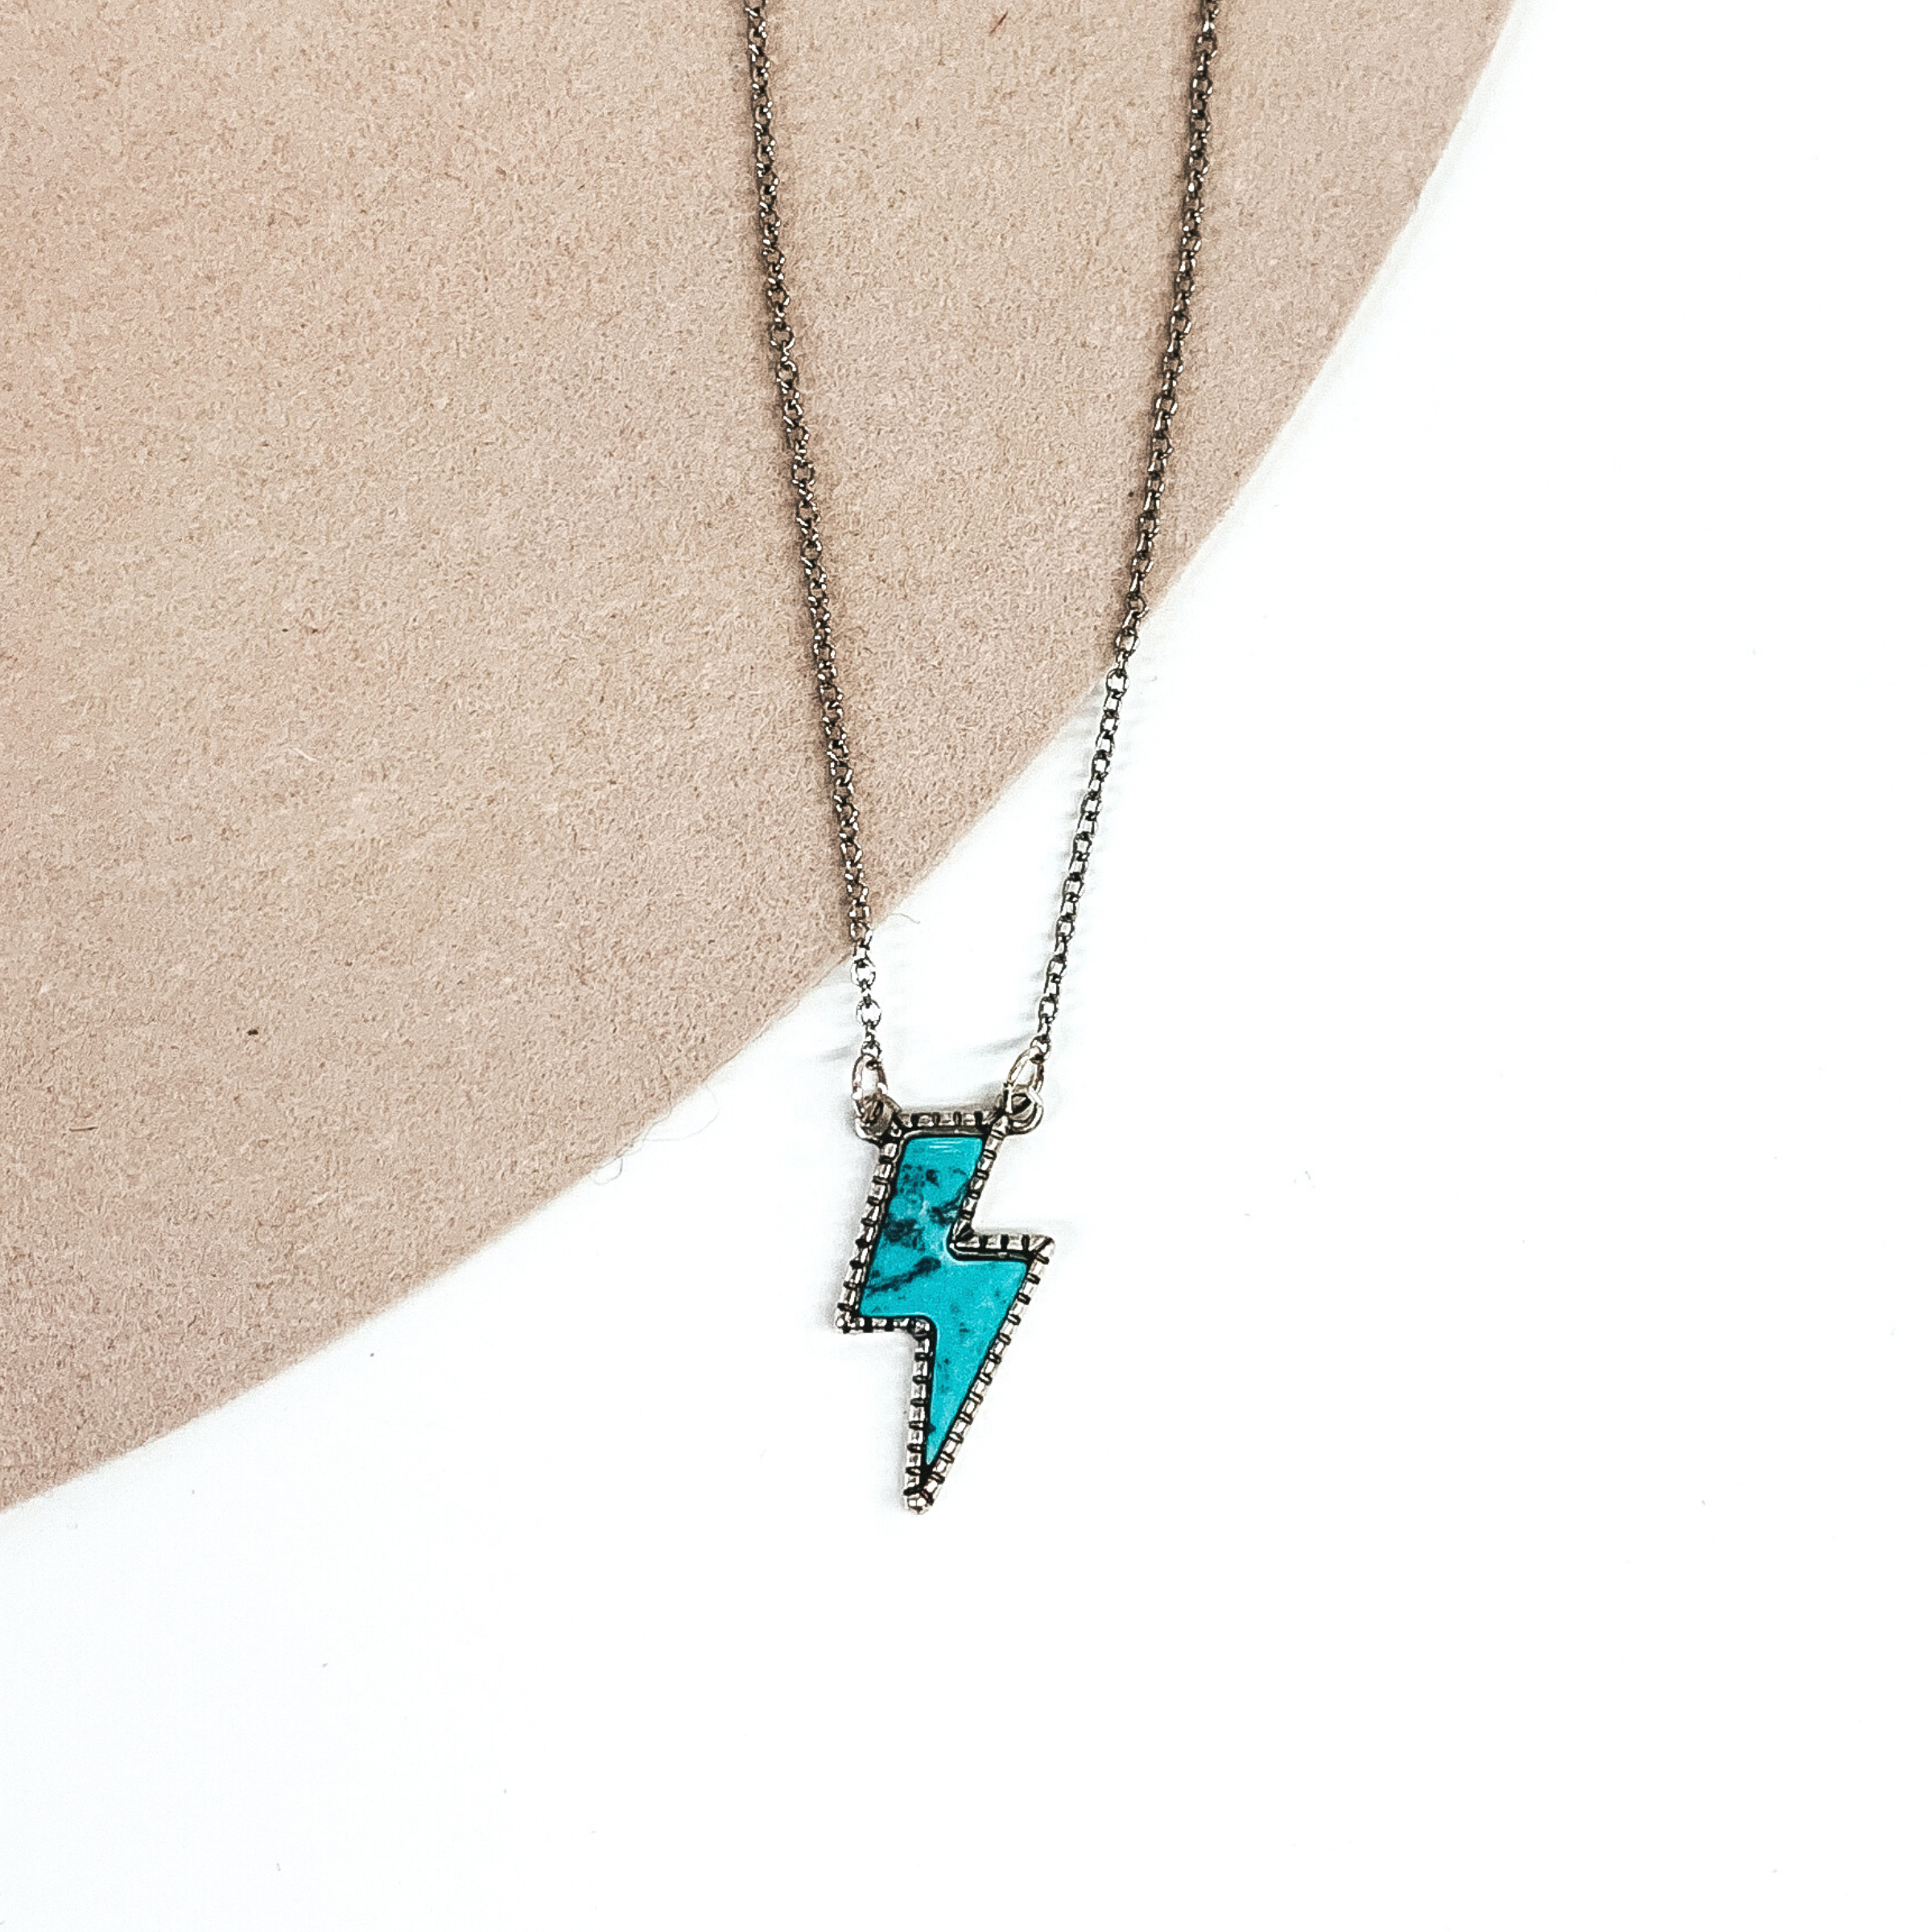 Silver necklace chain with turquoise lightning bolt shaped pendant. This necklace is pictured on a white and beige background. 